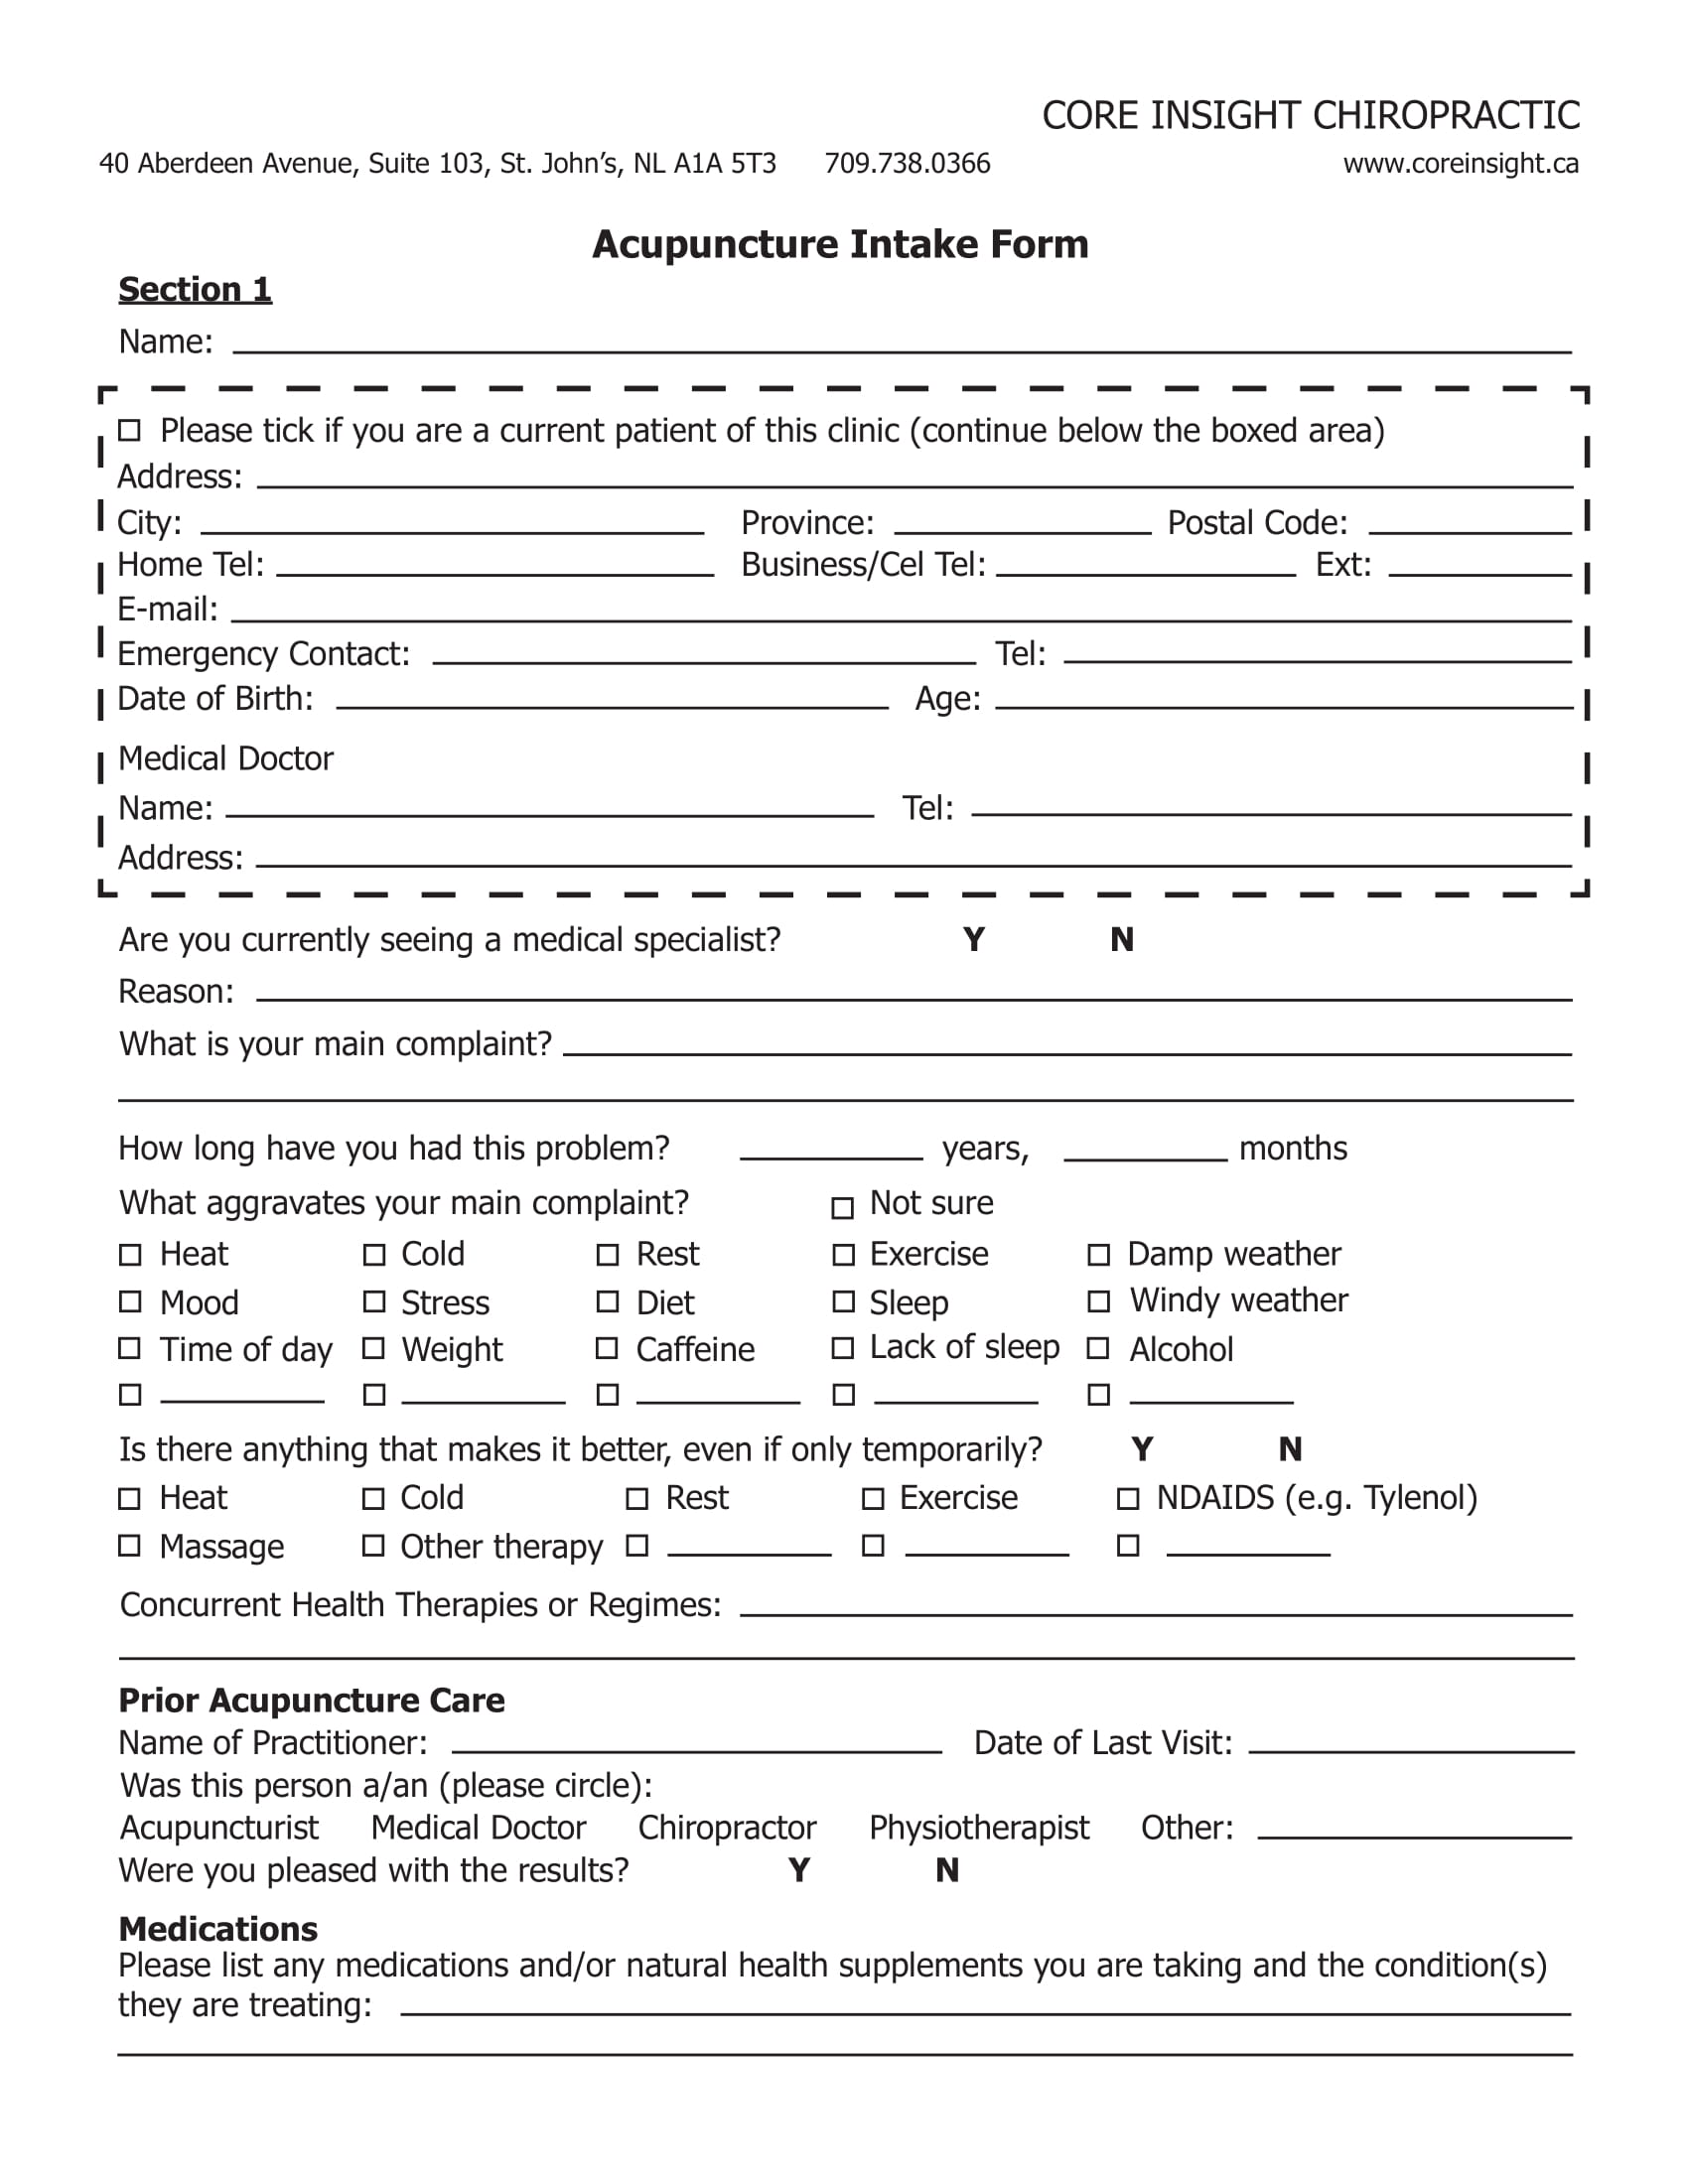 chiropractic acupuncture intake form 1